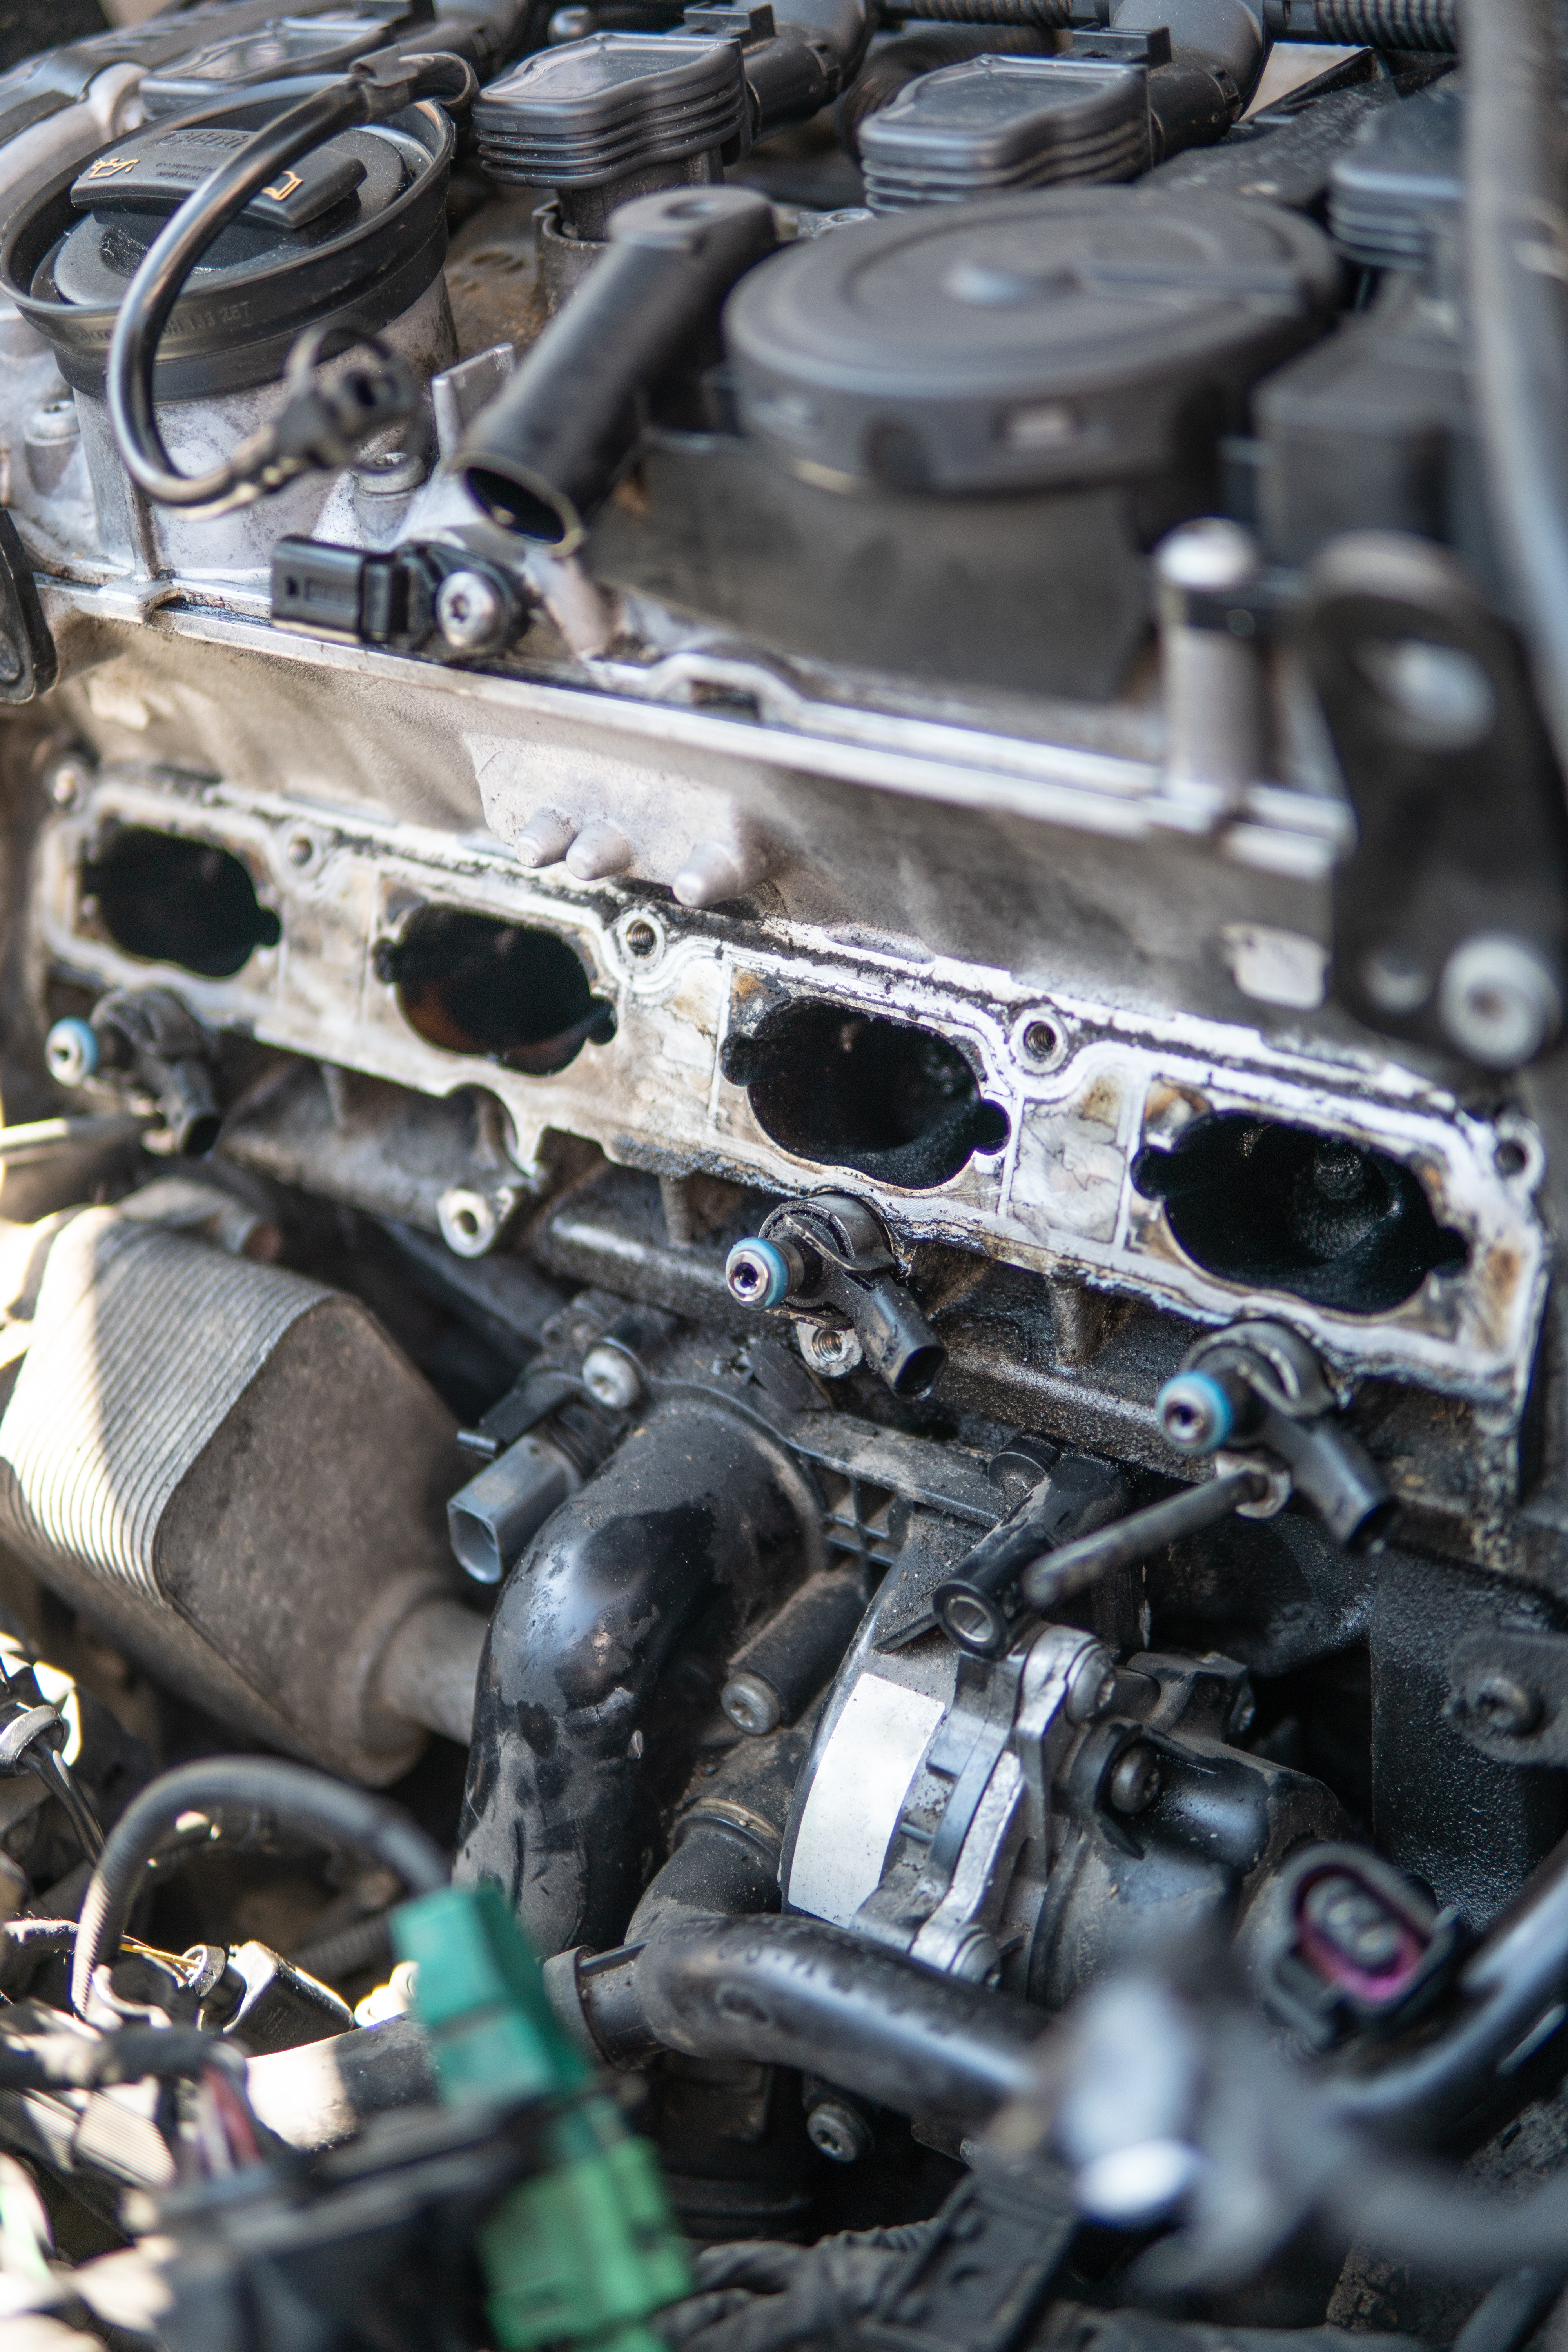 An image of a dirty intake manifold but DPF Alternatives can help with our expert intake manifold cleaning service in Houston, TX.